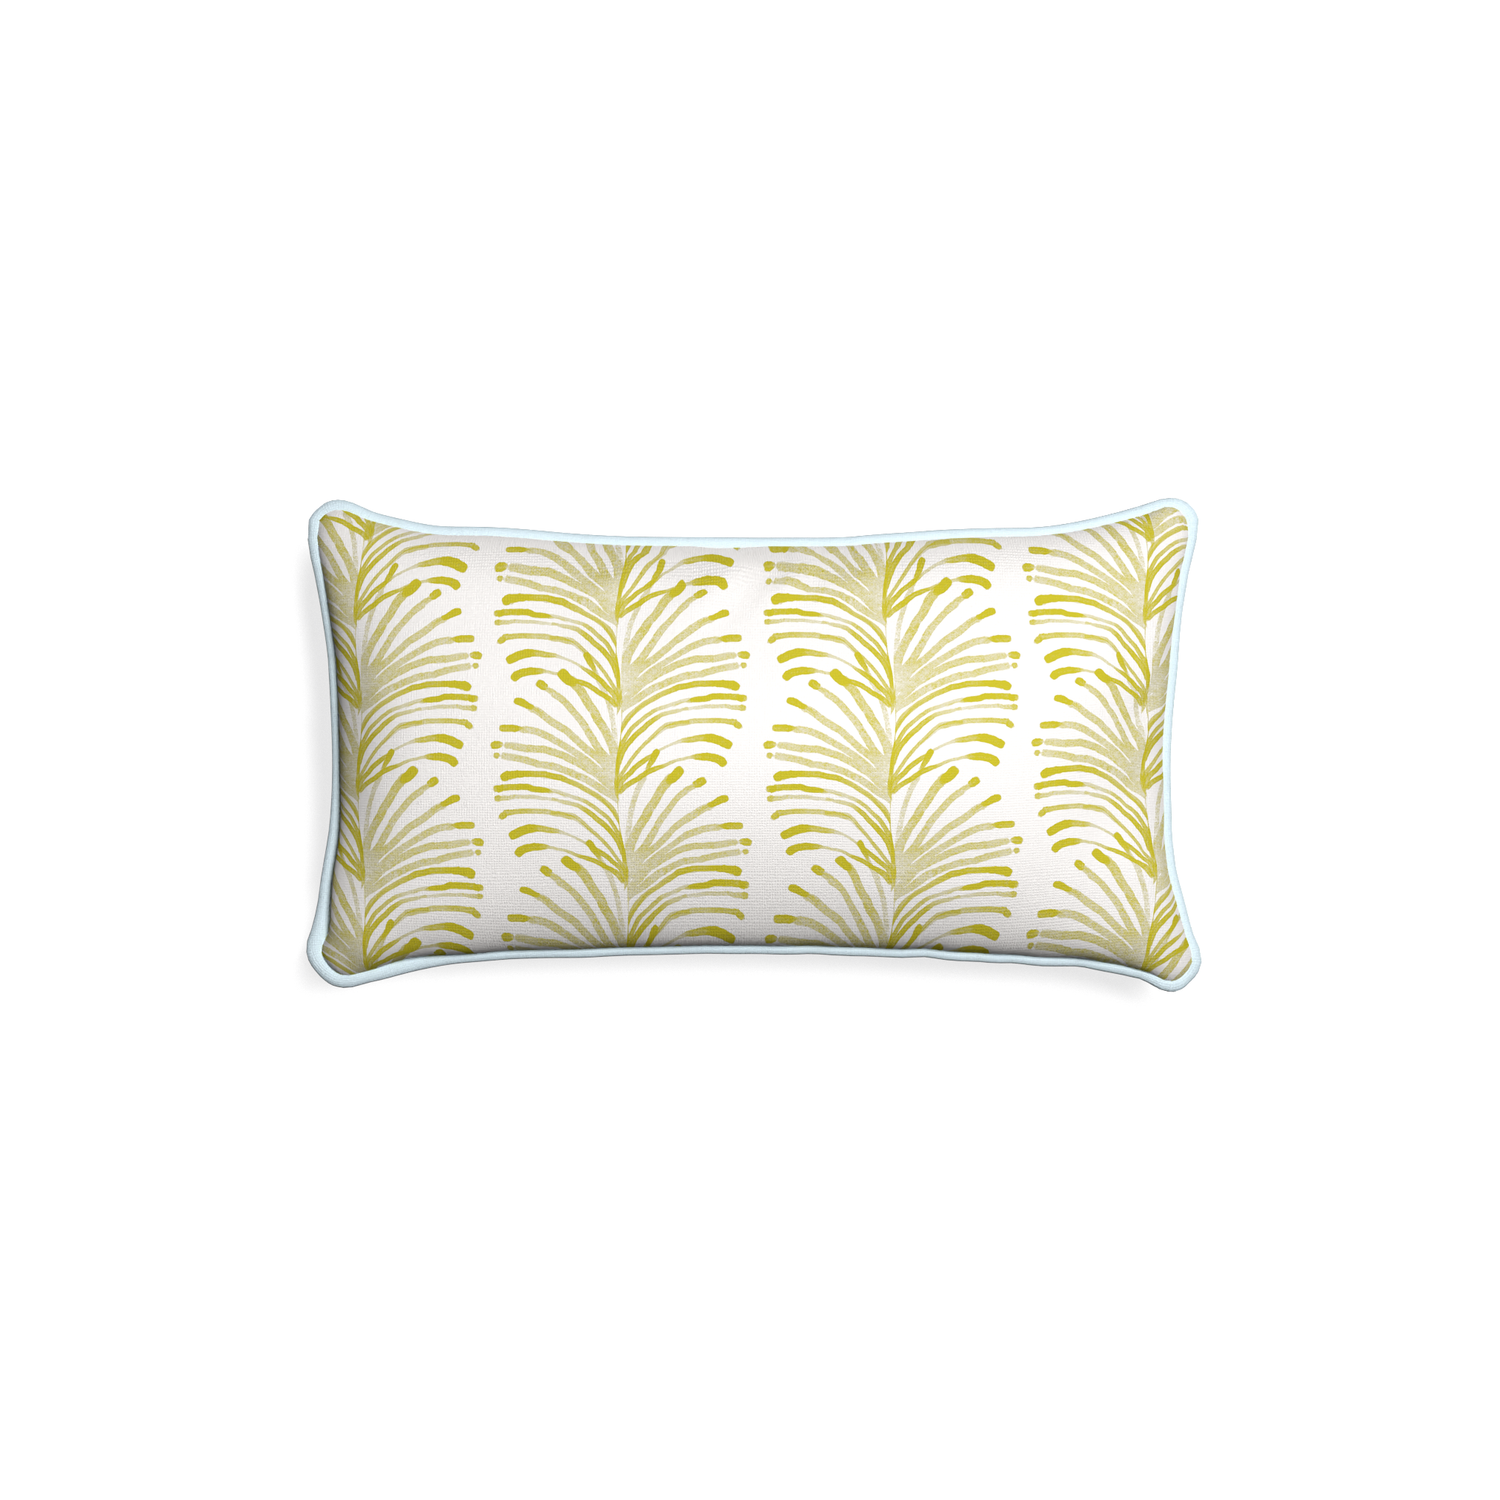 Petite-lumbar emma chartreuse custom yellow stripe chartreusepillow with powder piping on white background